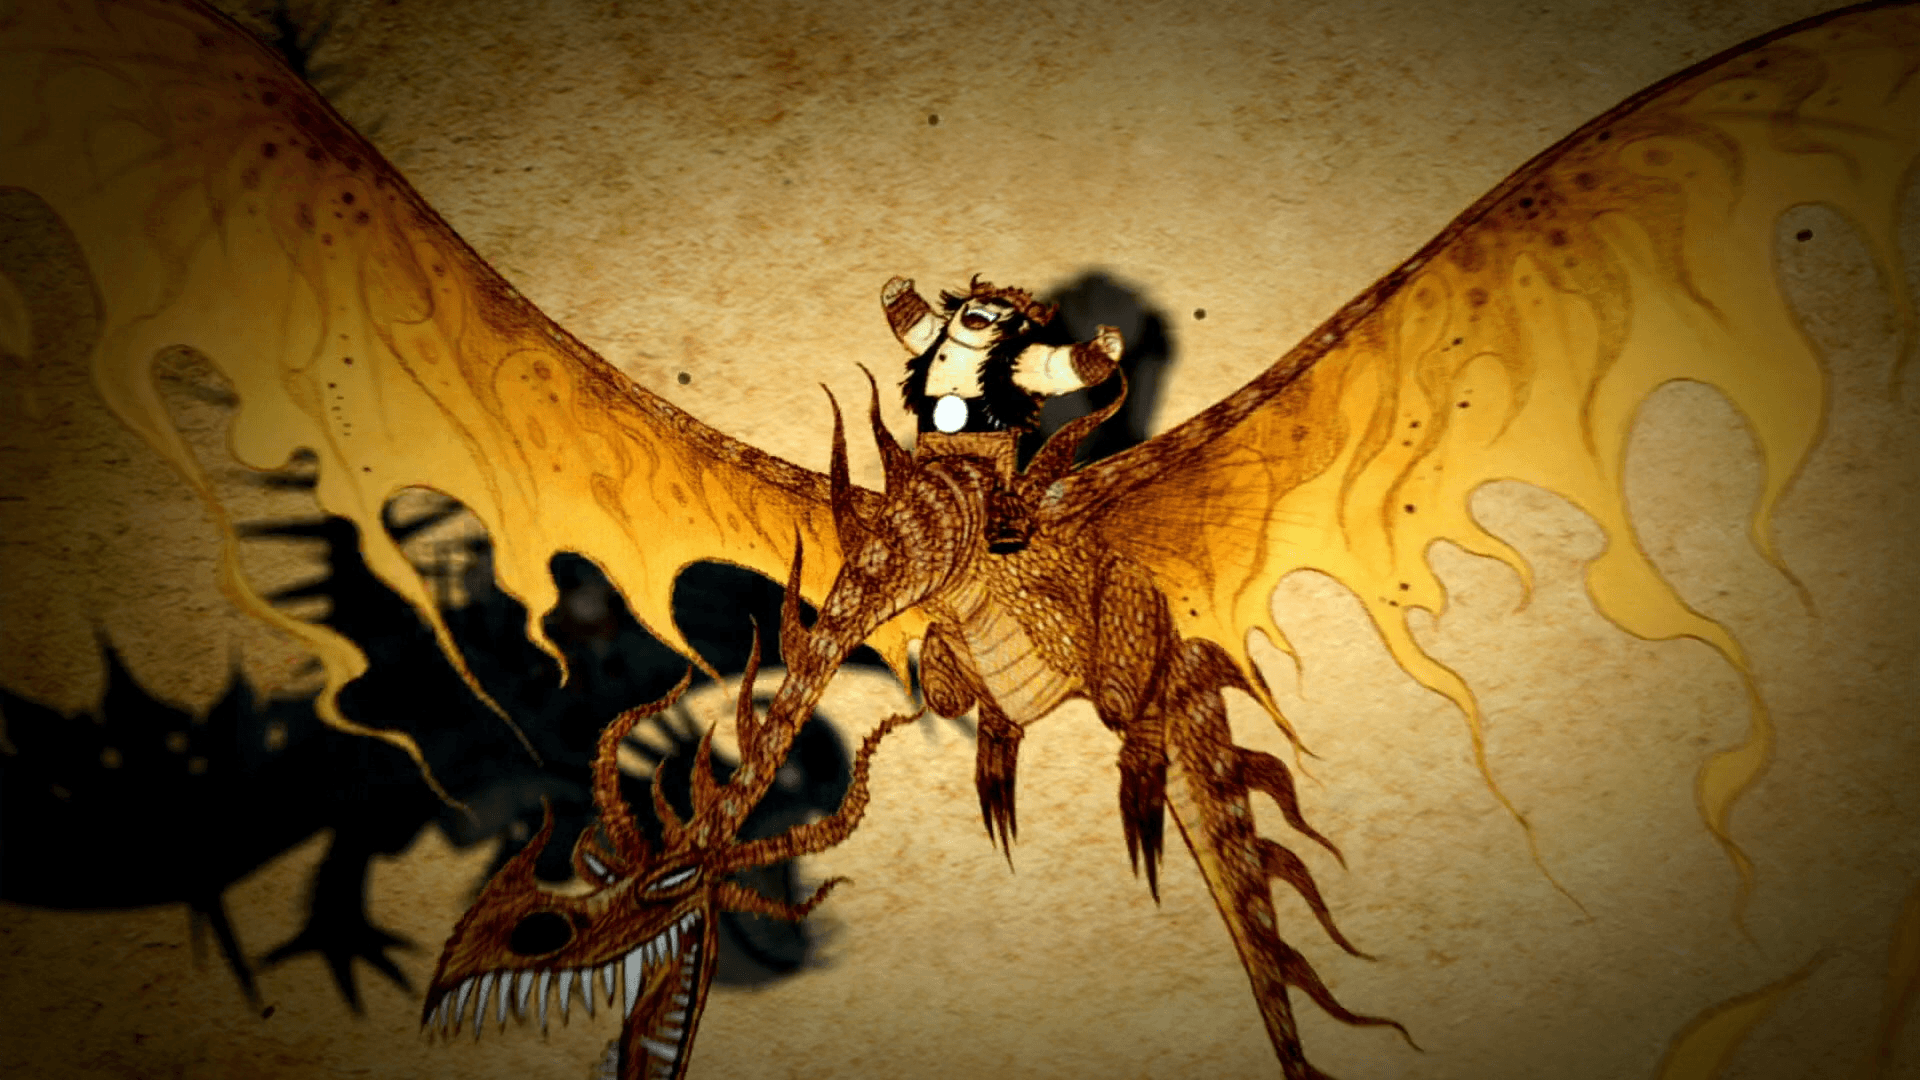 Nightmare the Dragon image Hookfang and Snotlout HD wallpaper